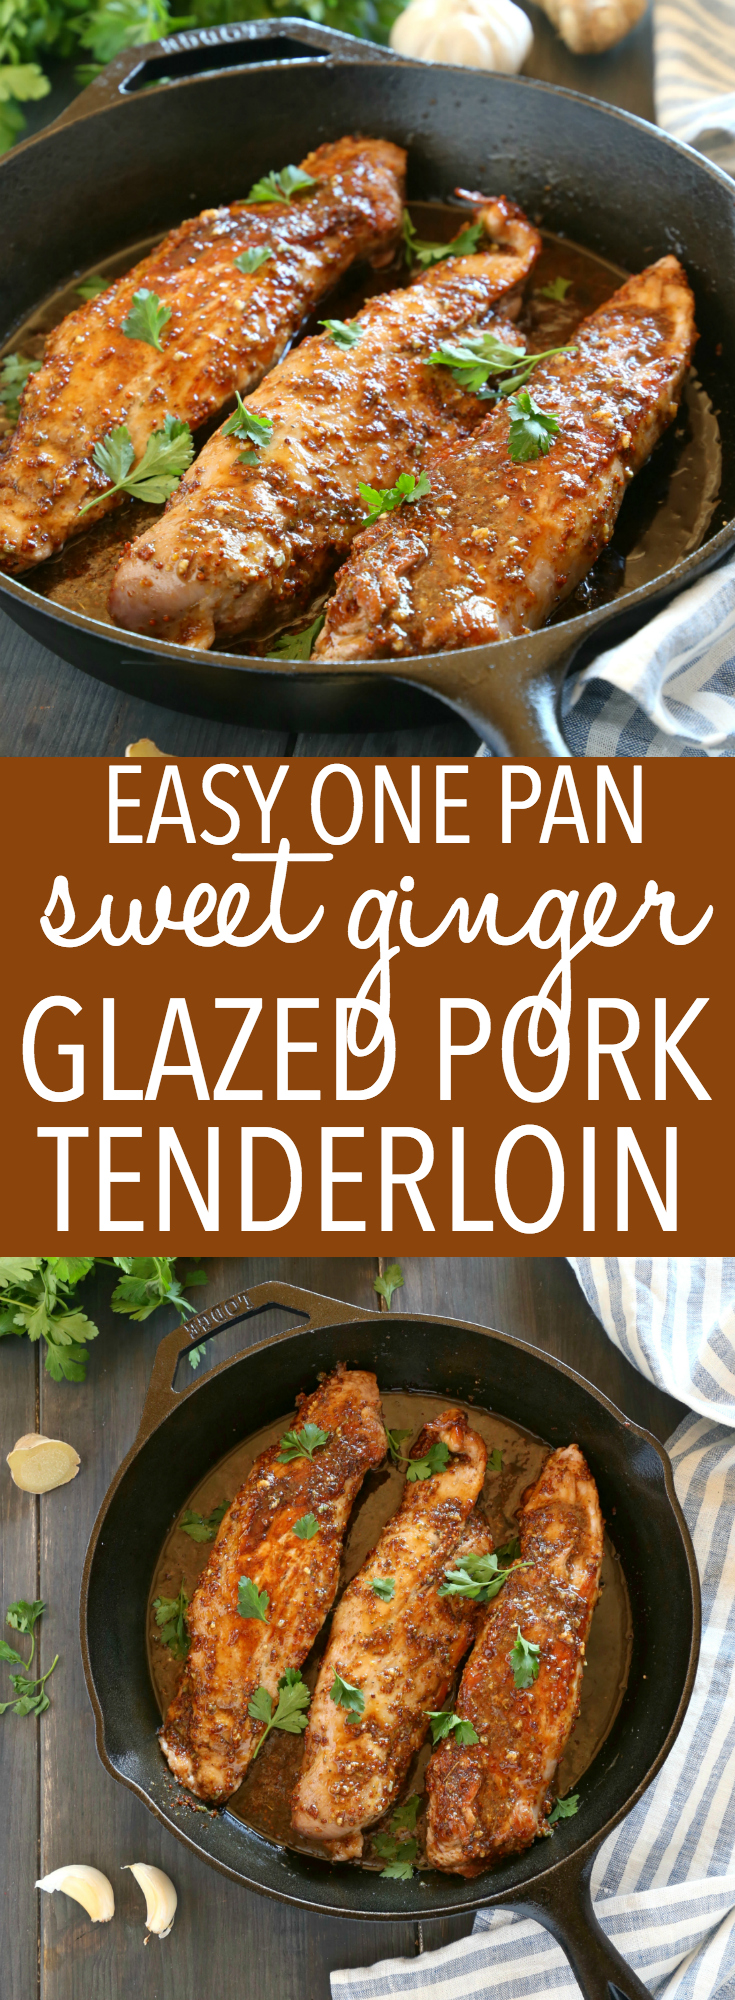 This Easy One Pan Sweet Ginger Glazed Pork Tenderloin is perfectly tender and juicy, cooked to perfection with a sweet ginger glaze! Made from basic ingredients you probably already have in your kitchen, this will quickly become one of your favourite ways to enjoy pork! Recipe from thebusybaker.ca! #easyporktenderloin #asianpork #gingerglazedpork via @busybakerblog